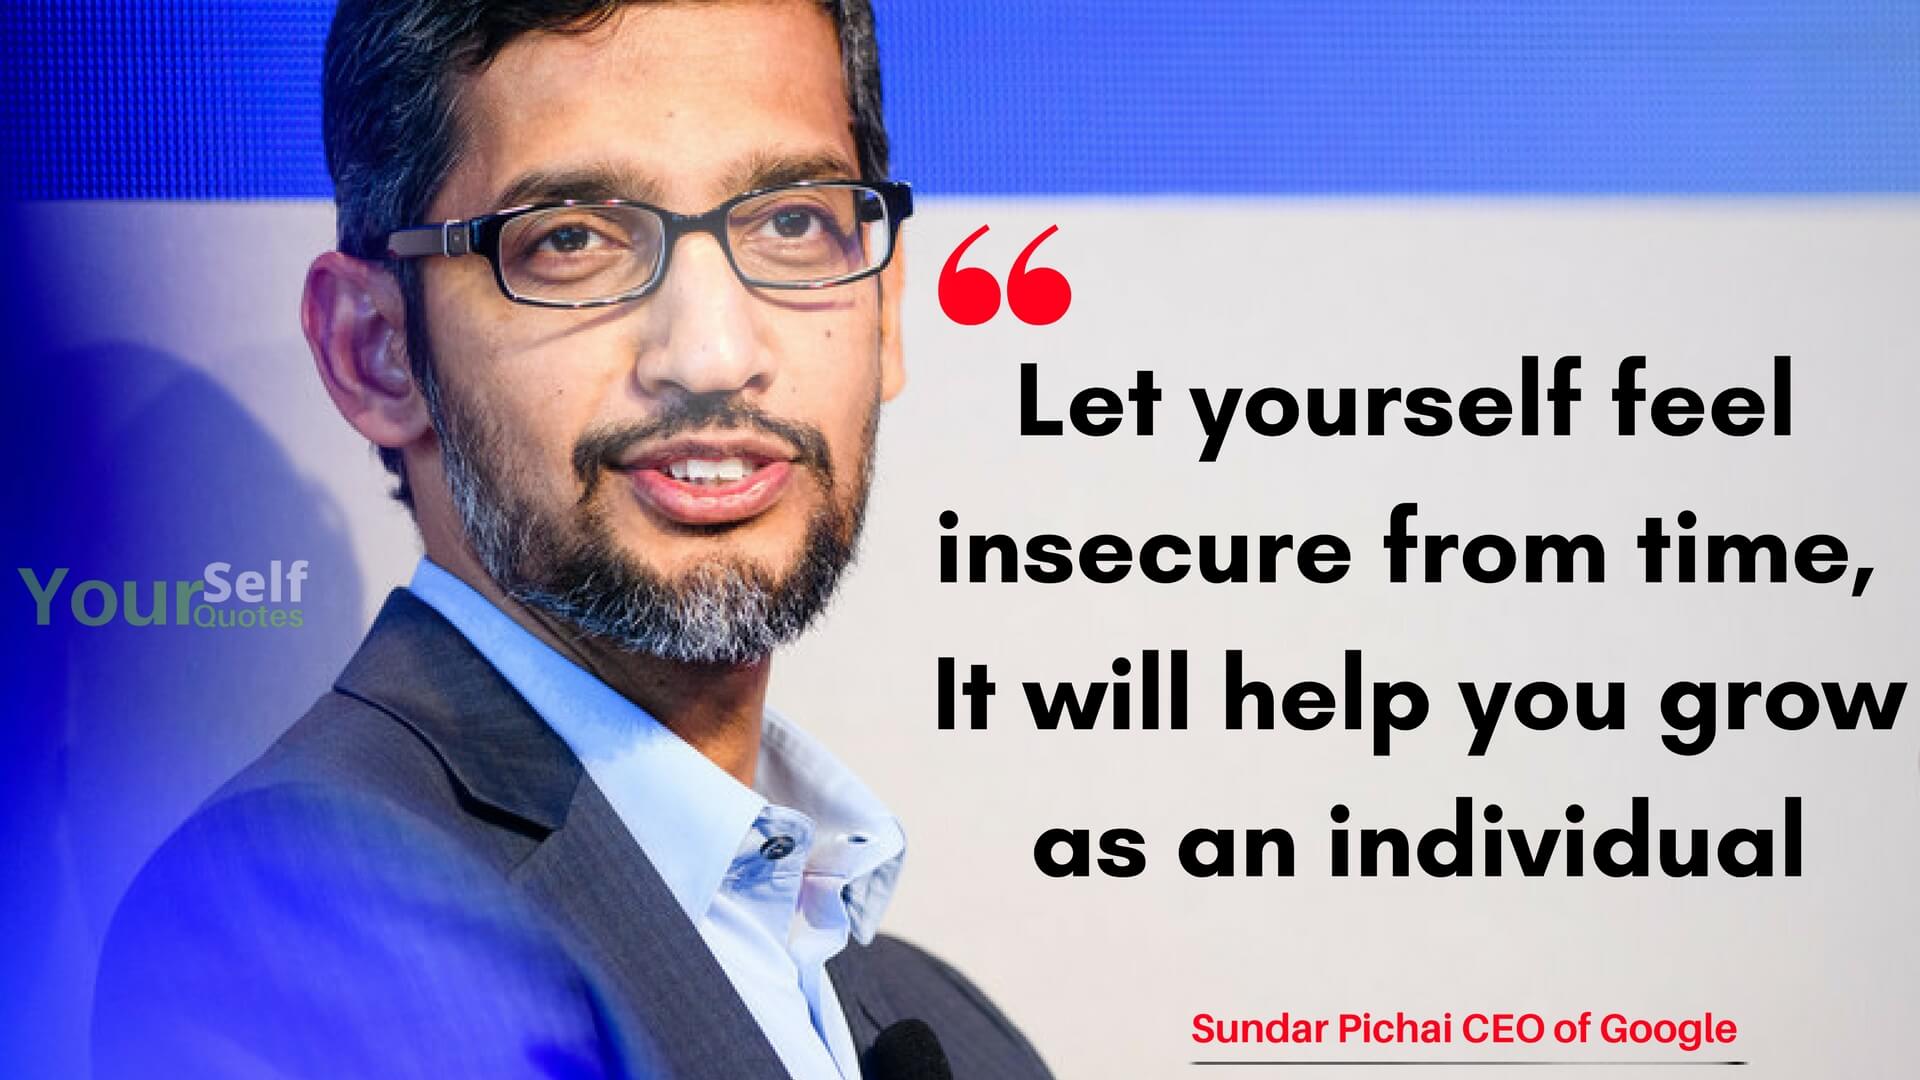 Sundar Pichai Quotes and Success Stories To Motivate You In Life